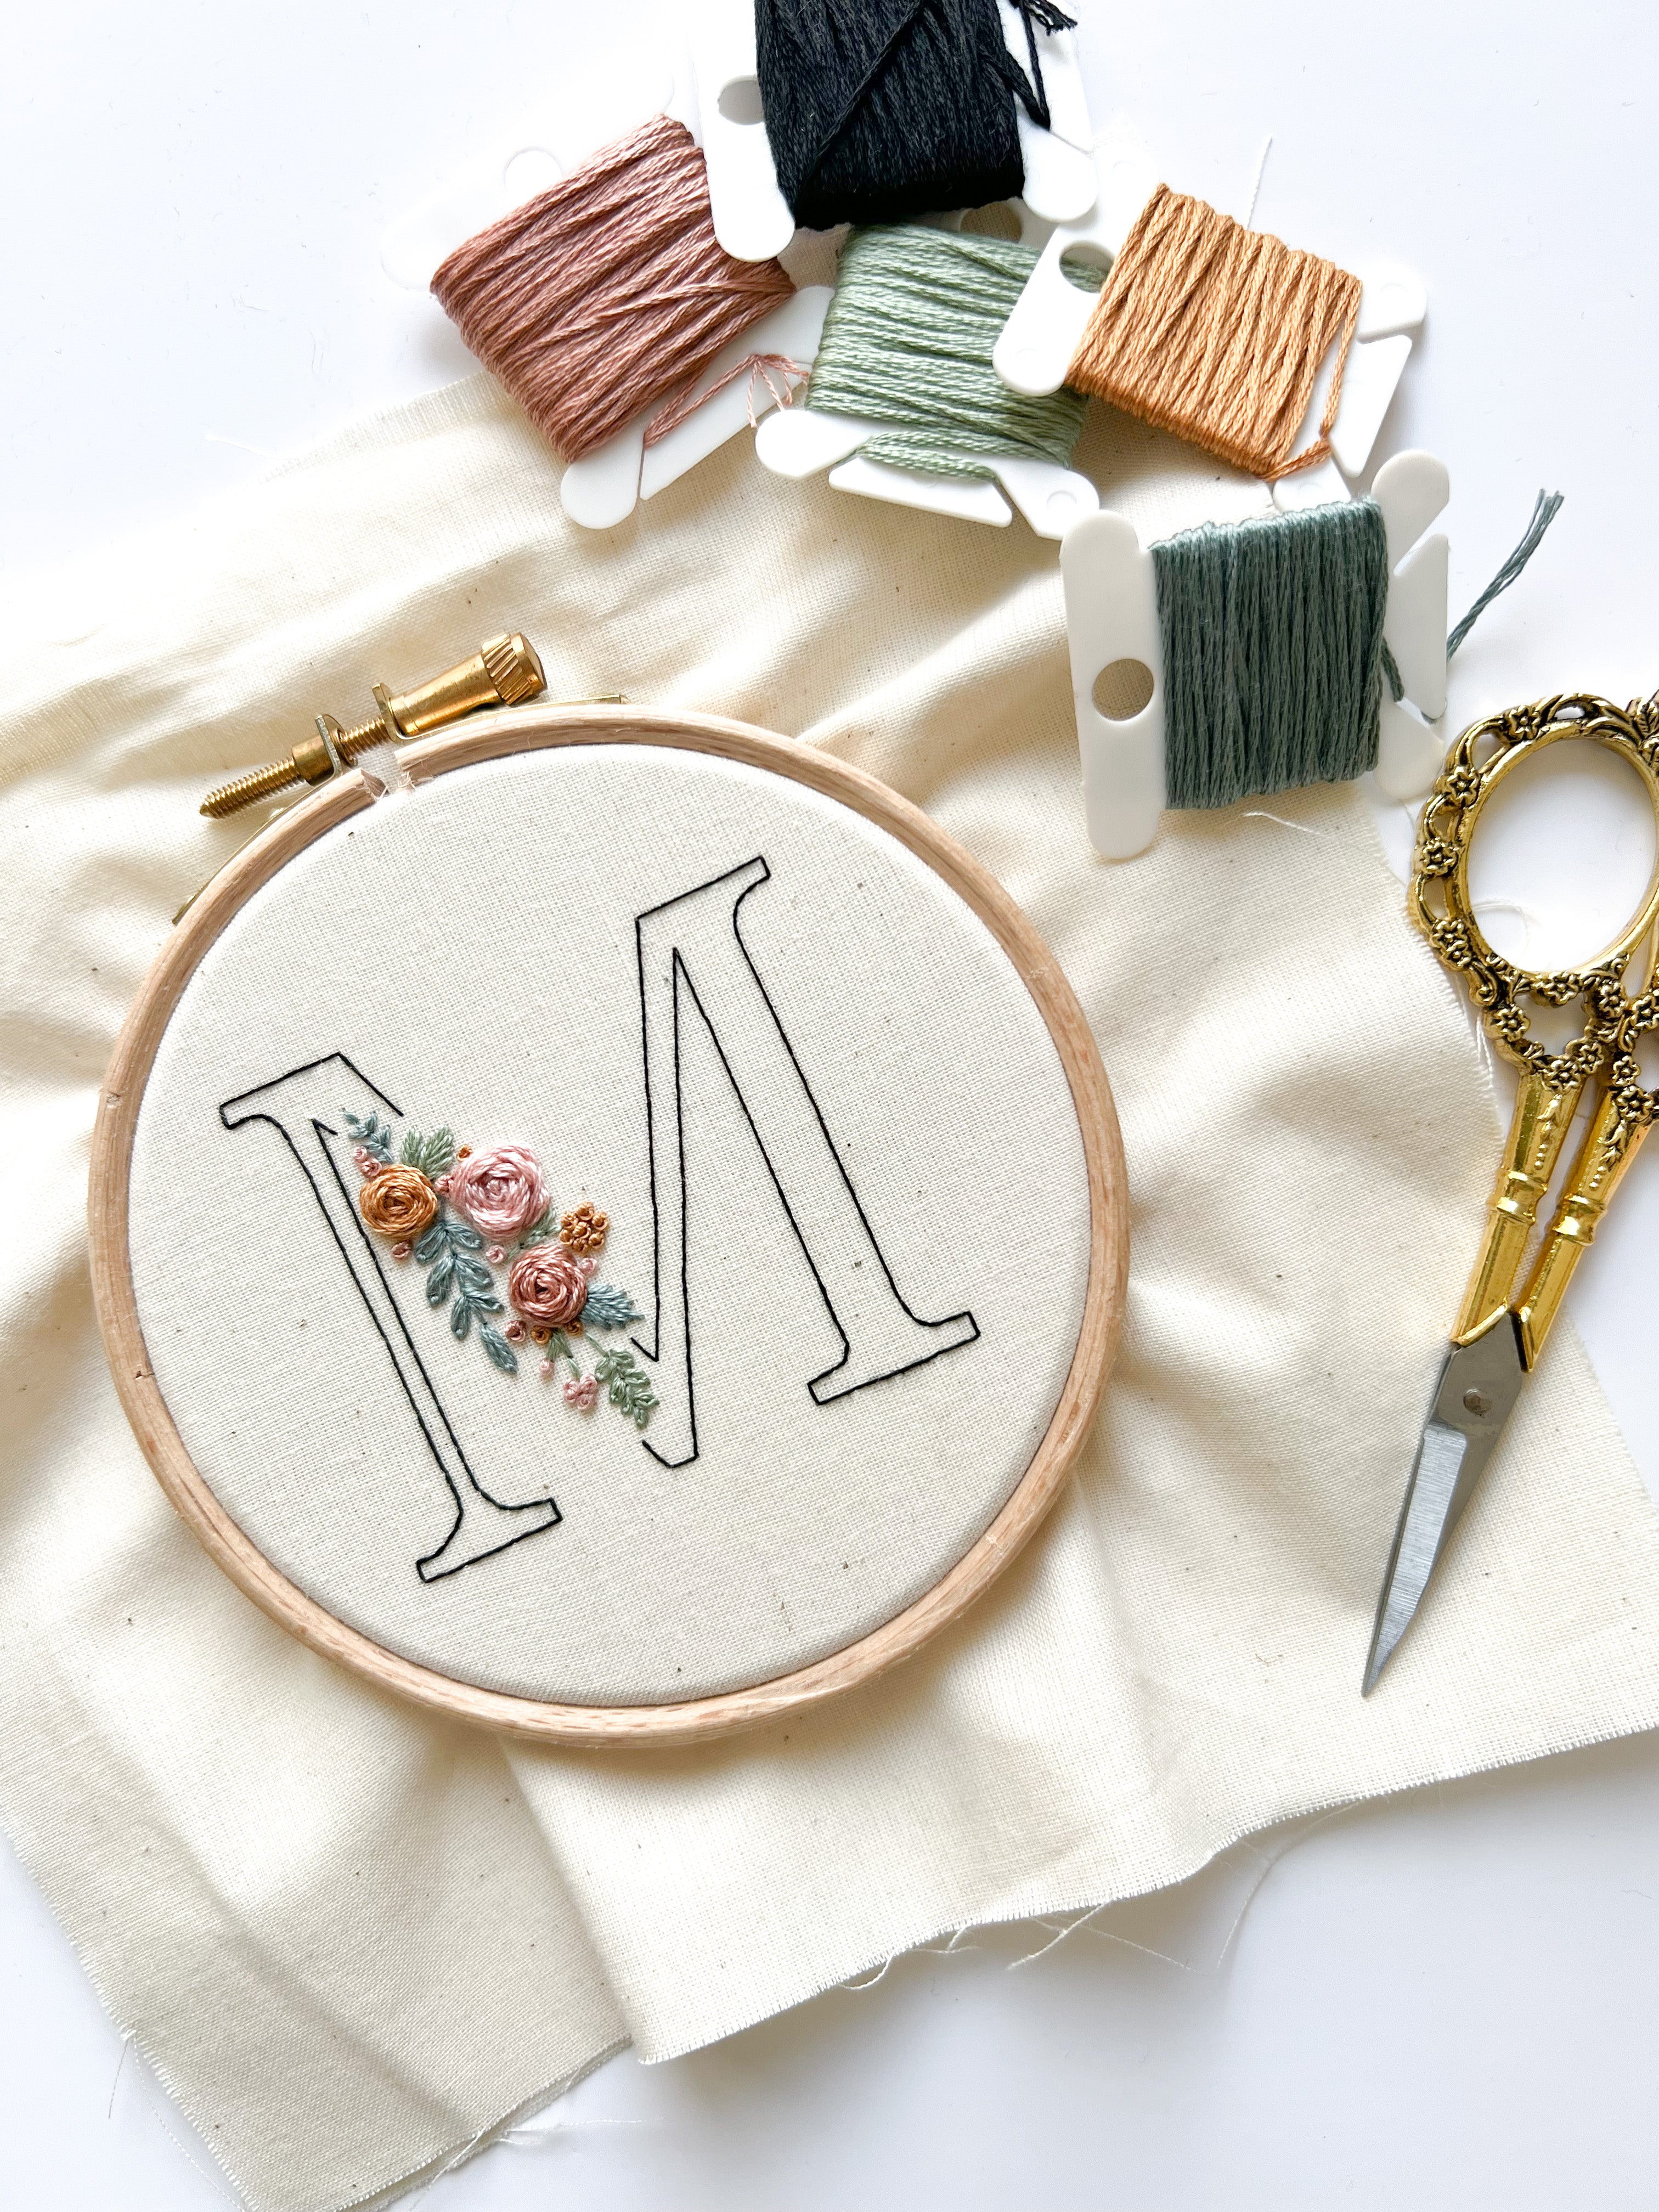 5 Embroidery Projects Anyone Can Make